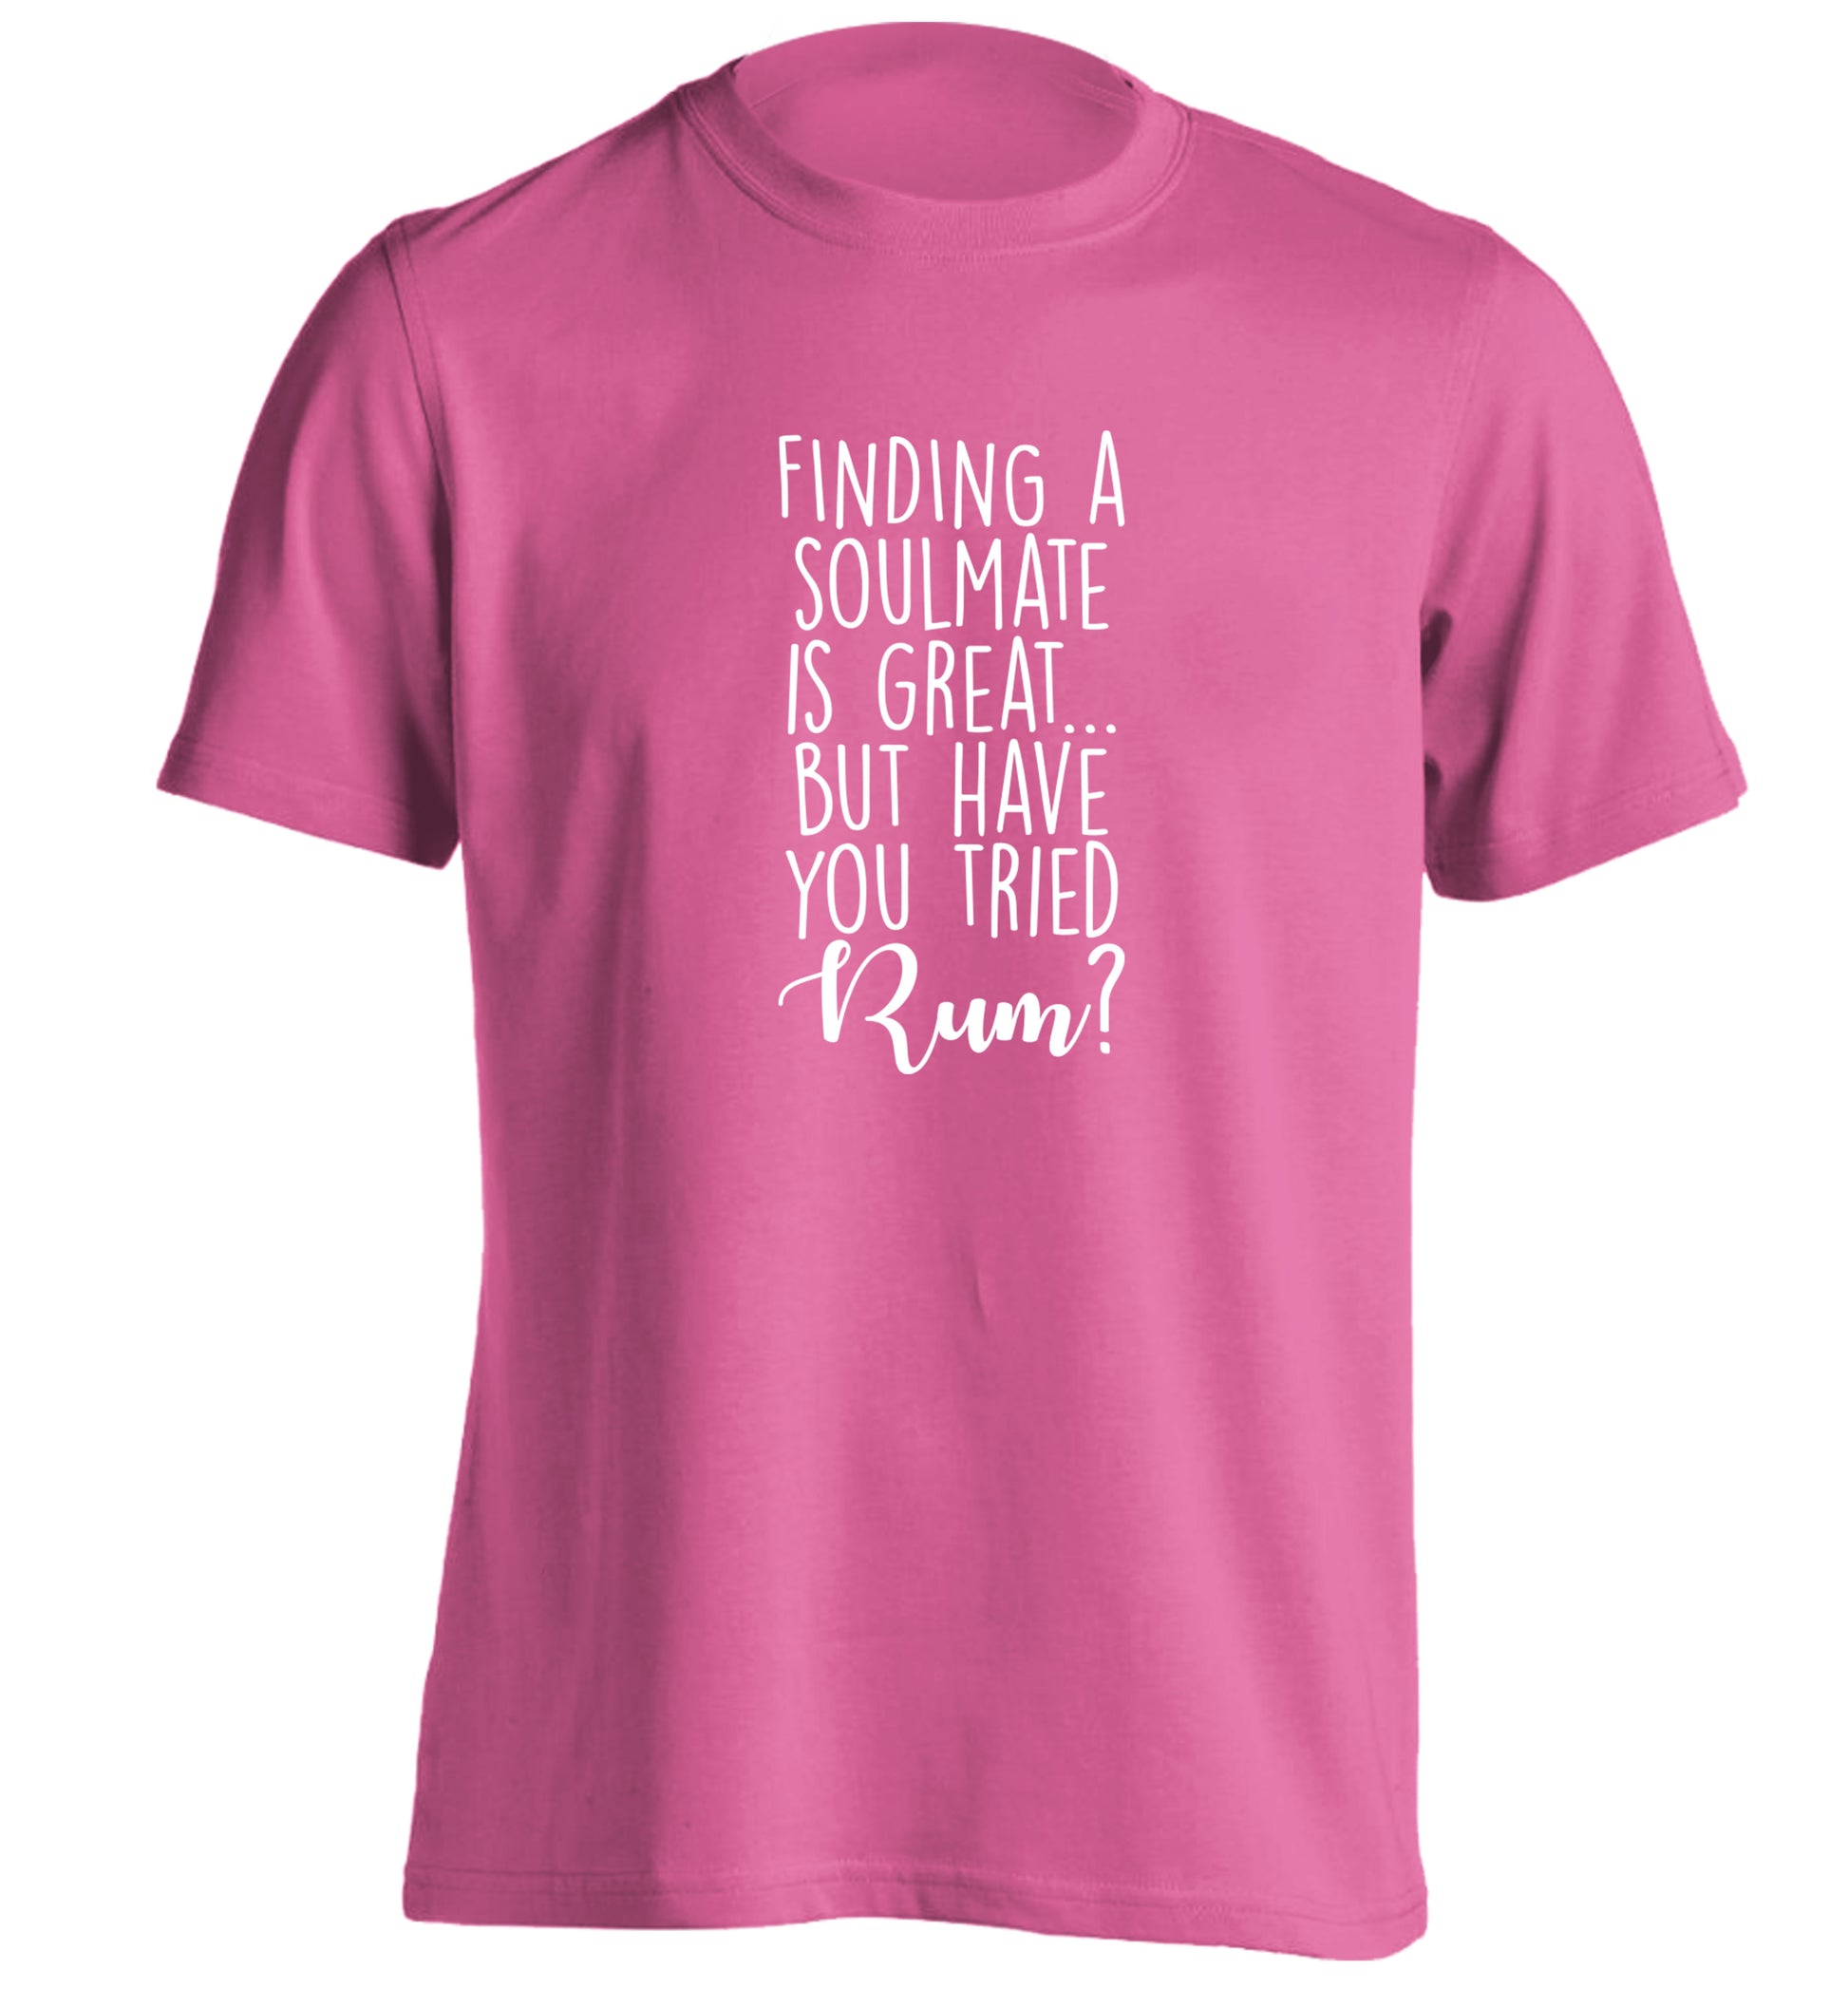 Finding a soulmate is great but have you tried rum? adults unisex pink Tshirt 2XL